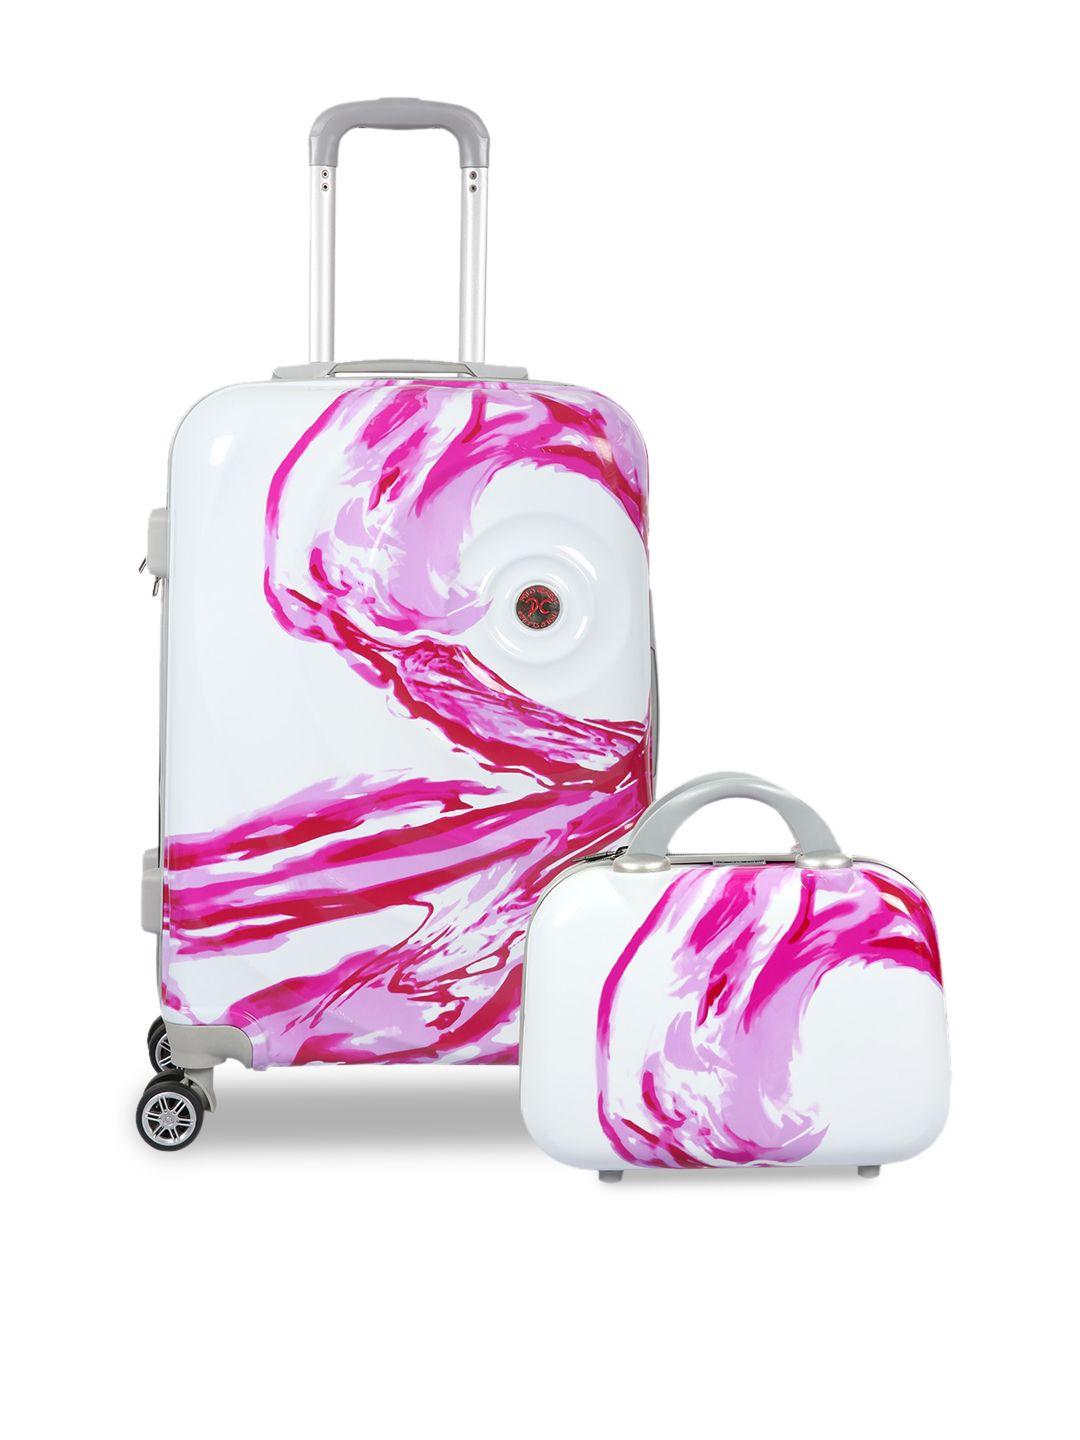 polo class unisex white & pink medium trolley suitcase with vanity bag